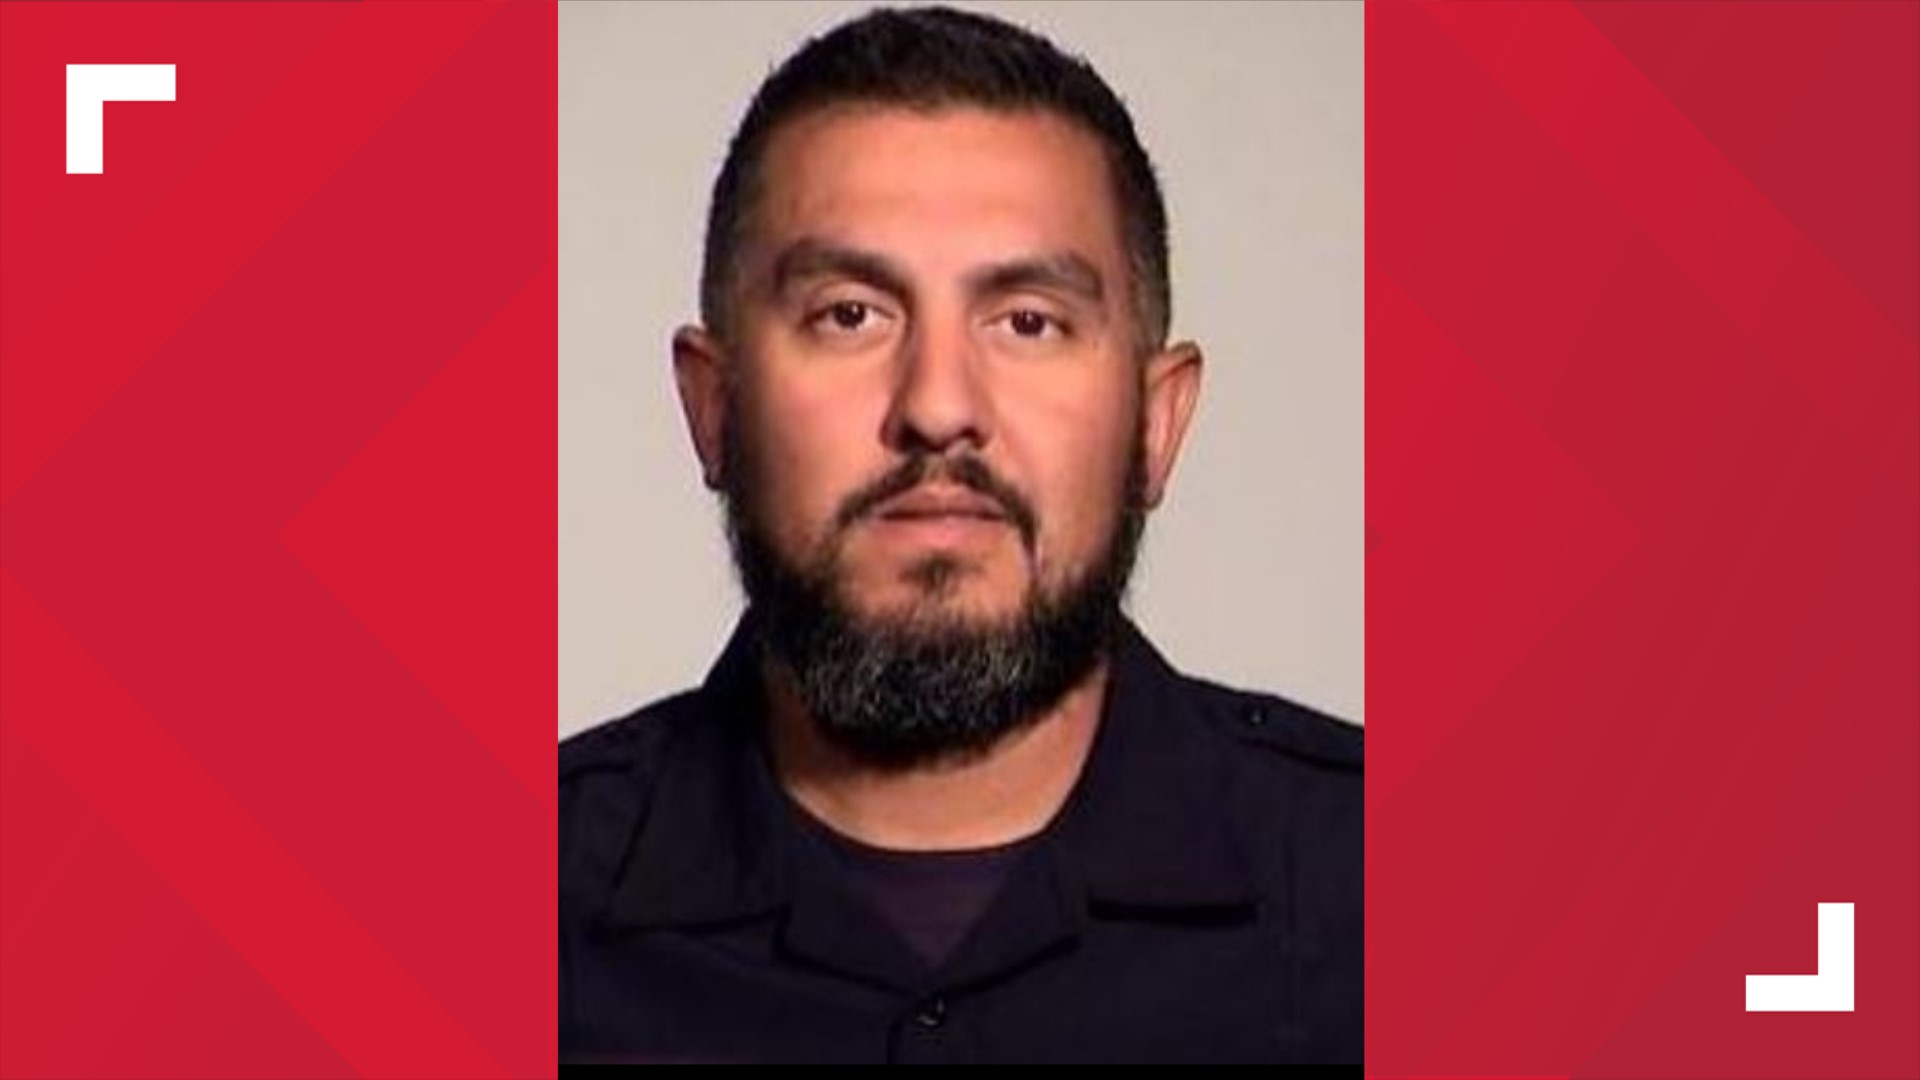 SAPD officer arrested on child pornography charges